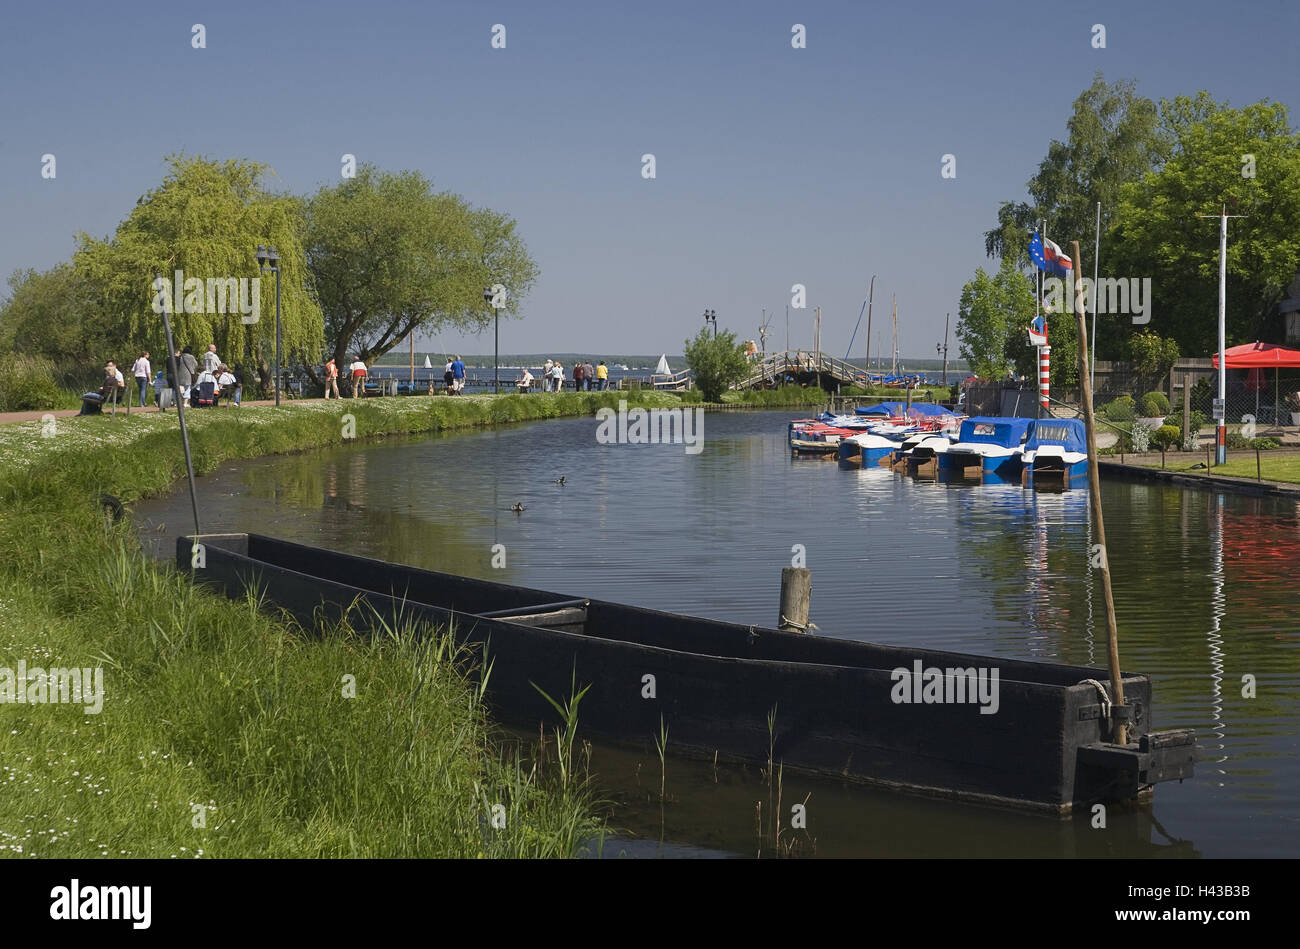 Germany, Lower Saxony, Steinhude, harbour, Steinhuder sea, Wunstorf, part town, scenery, lake, boots, bridge, landing stage, shore, way, person, tourist, tourism, outside, summer, resort, inland lake, nature reserve, Stock Photo